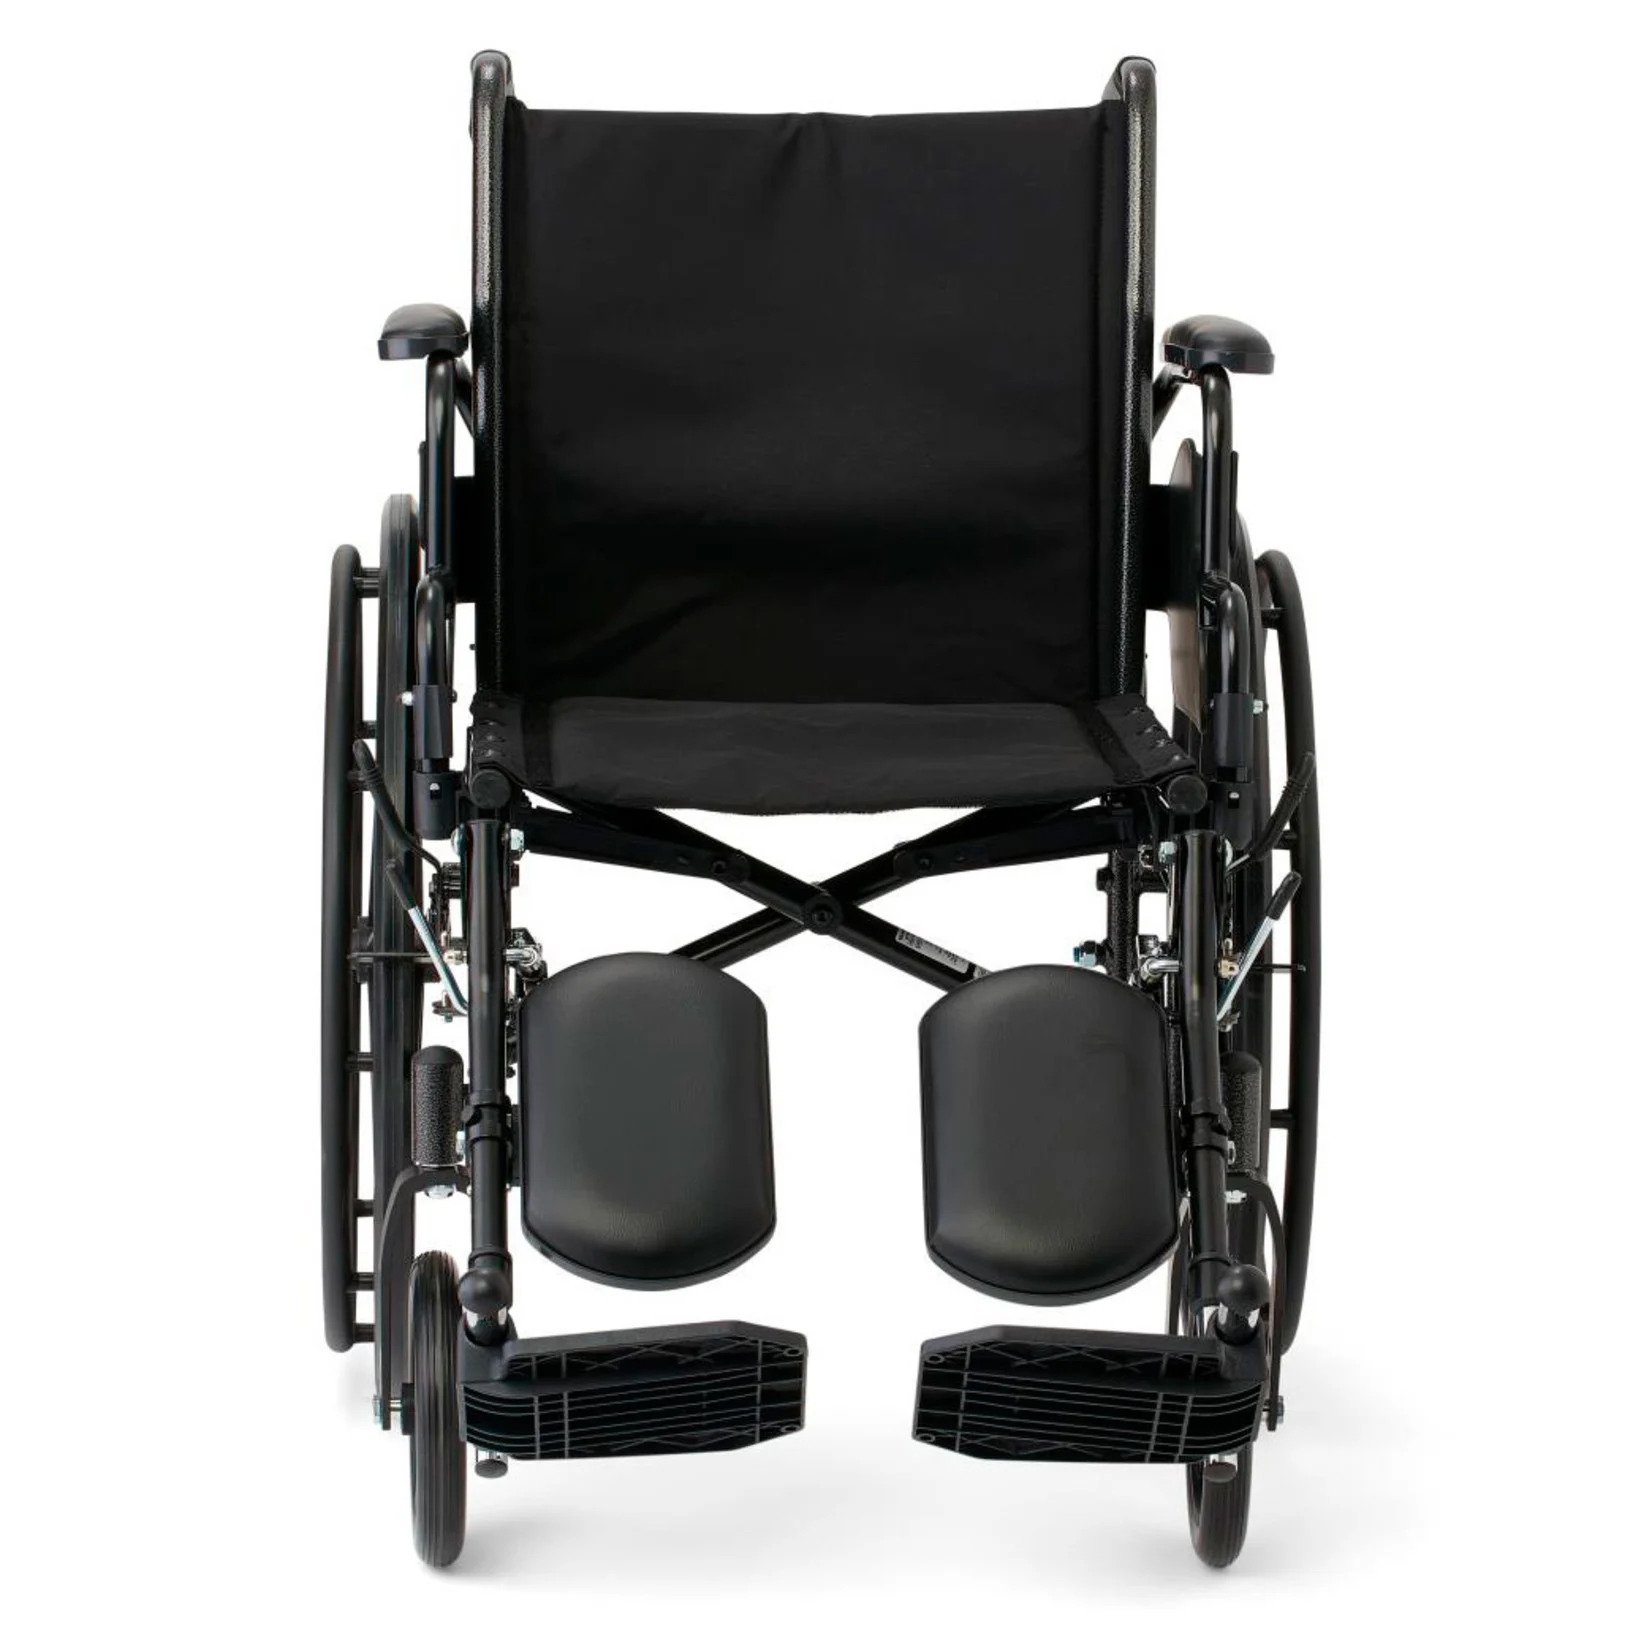 A Medline K3 Guardian Wheelchair with padded legrests.